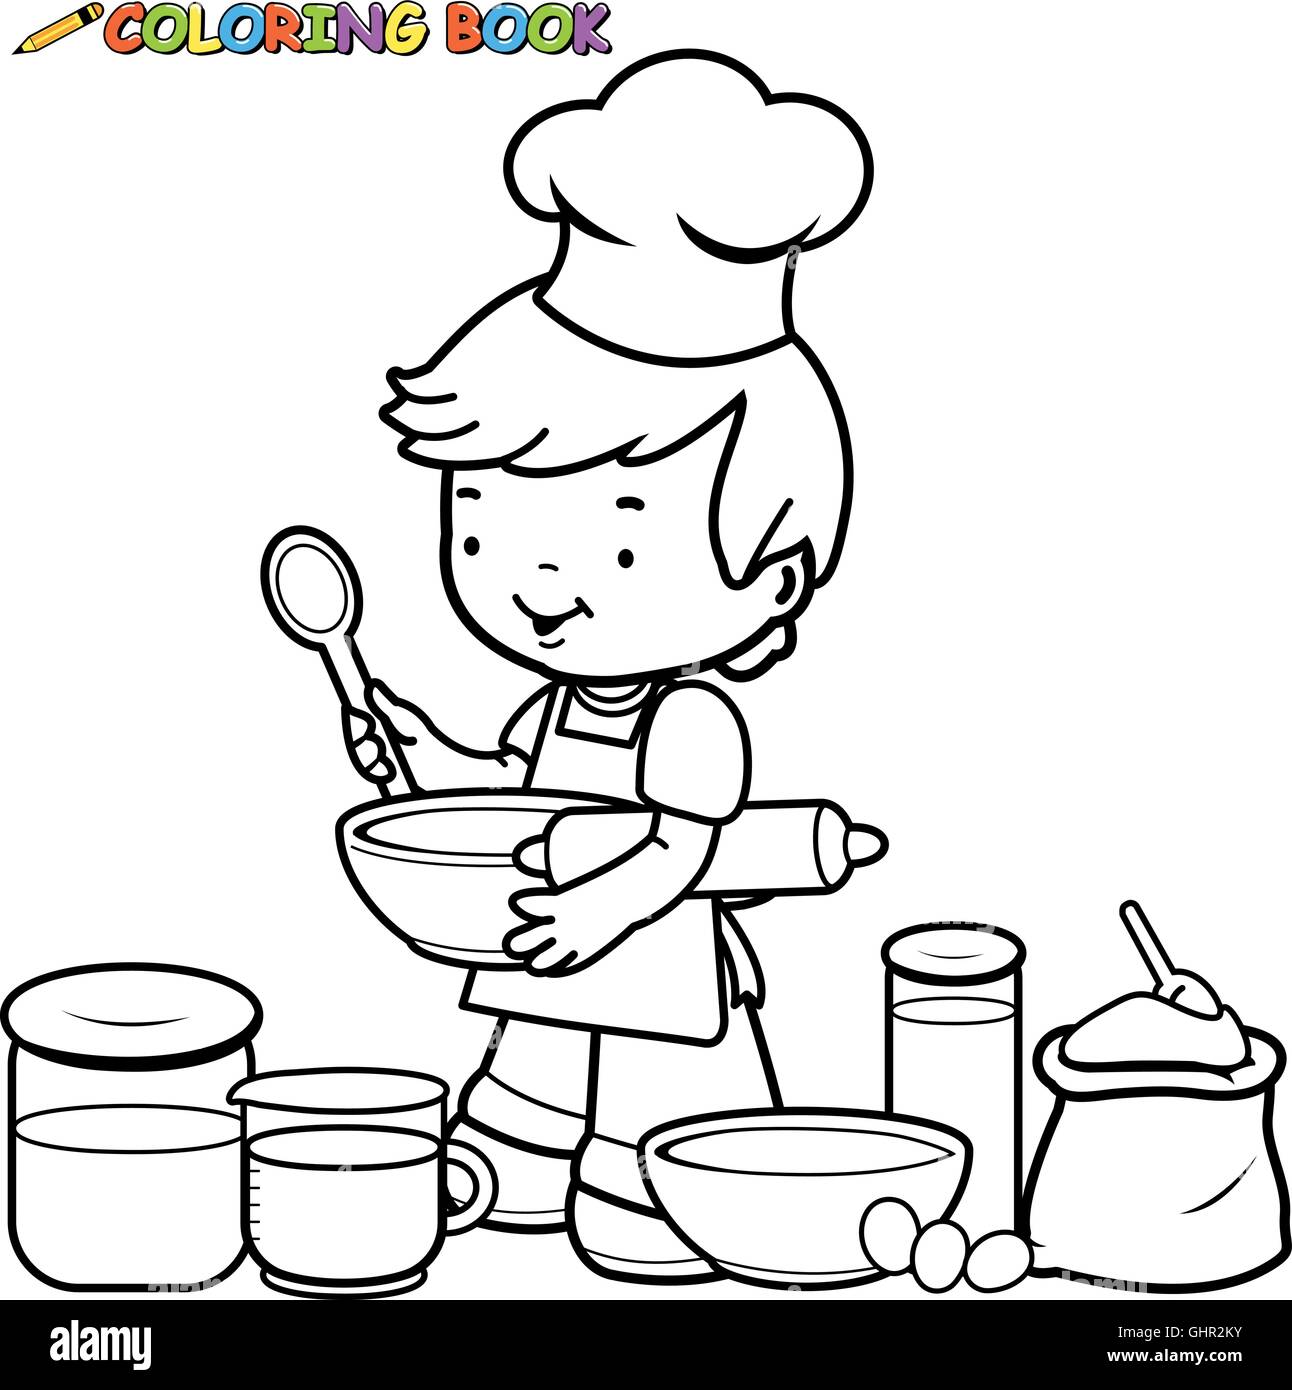 Little boy preparing to cook coloring book page. Stock Vector